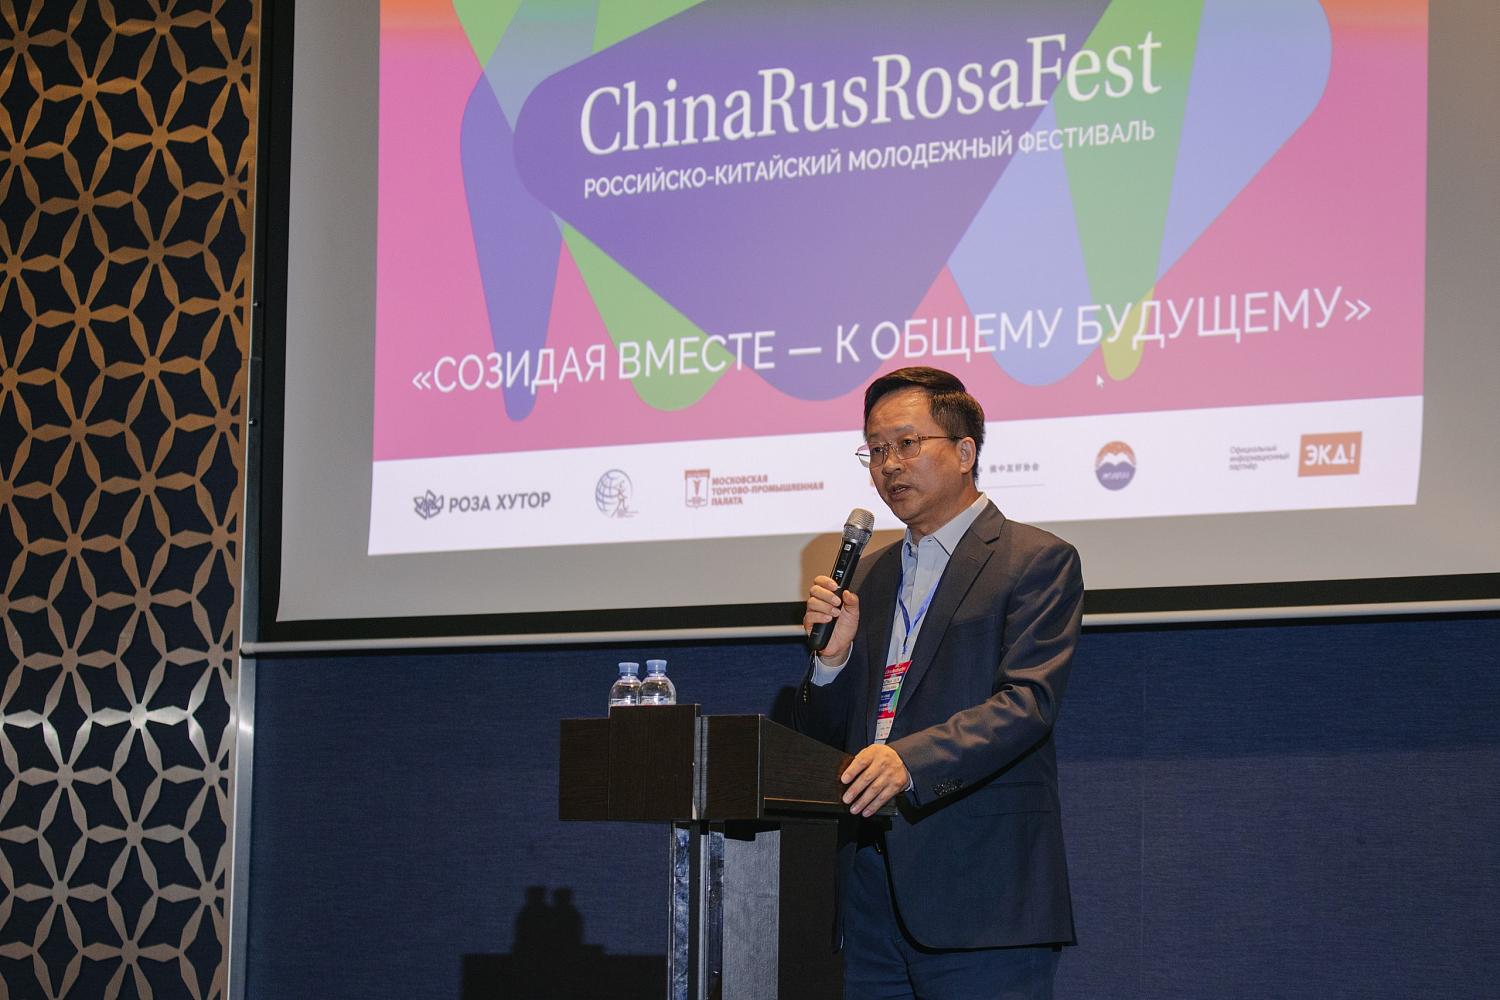 The Russian-Chinese Youth Festival opens new prospects for business partnership between the two countries